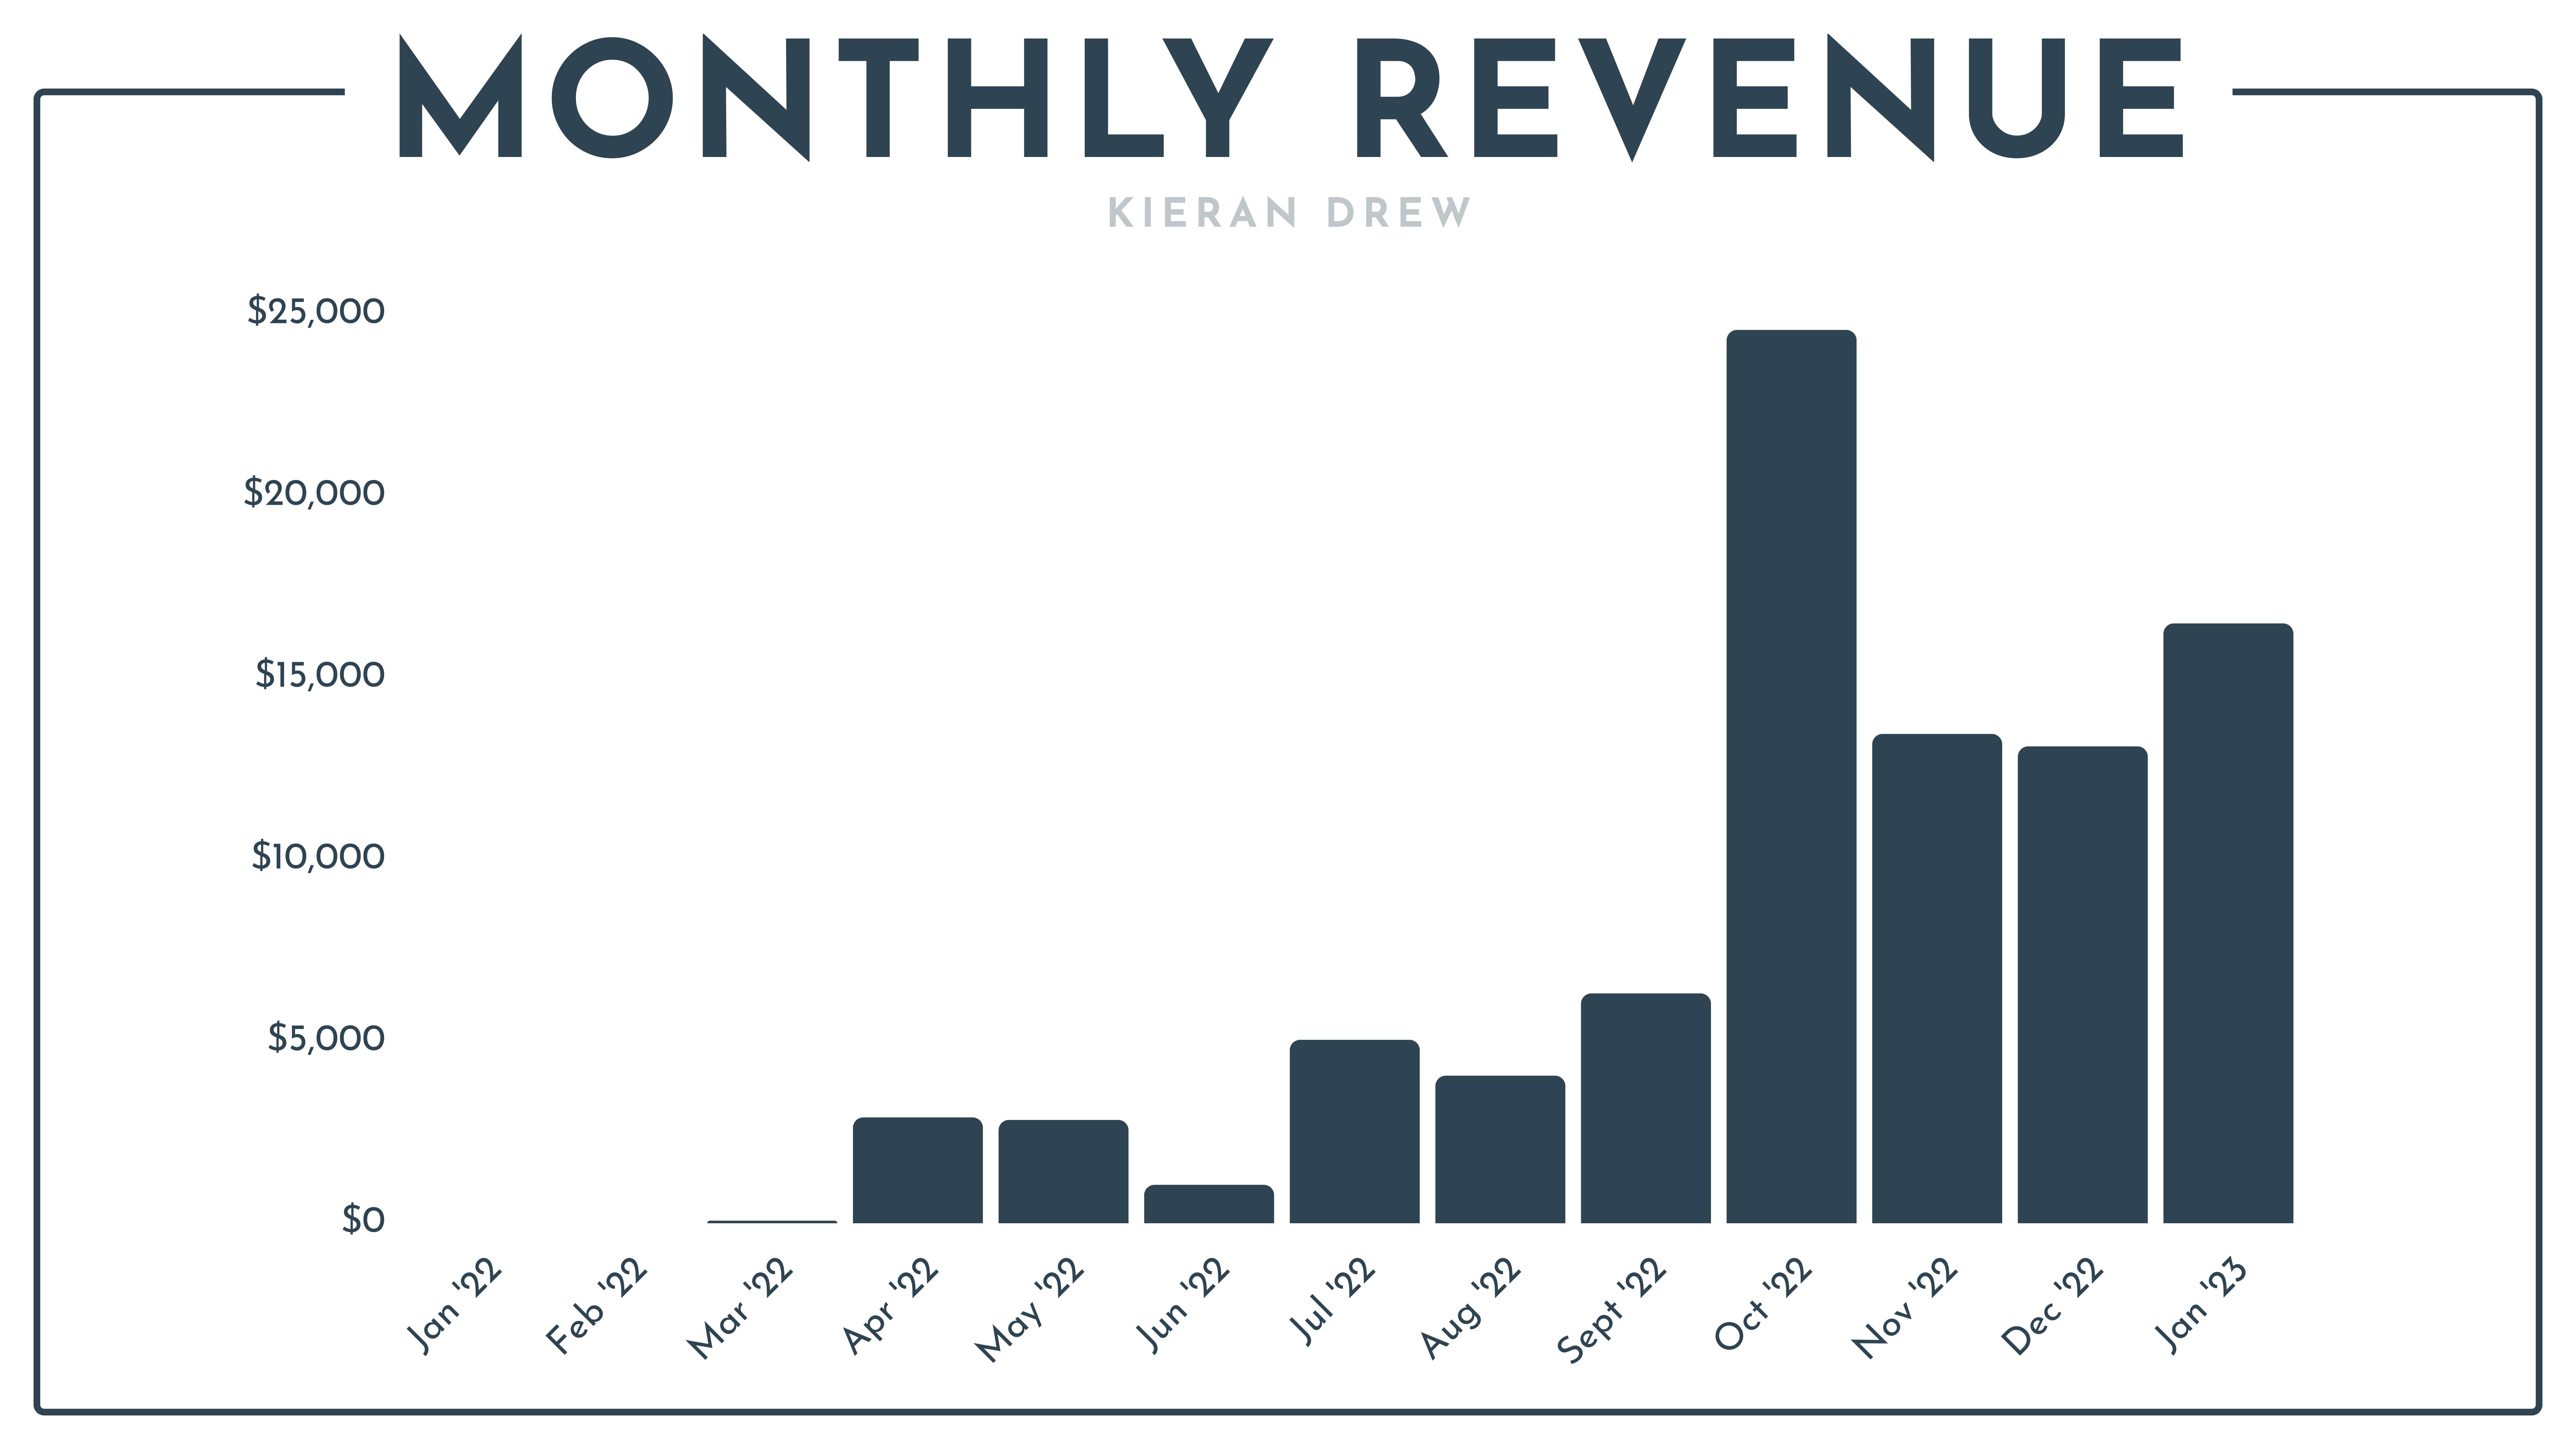 BAR CHART - MONTHLY REVENUE